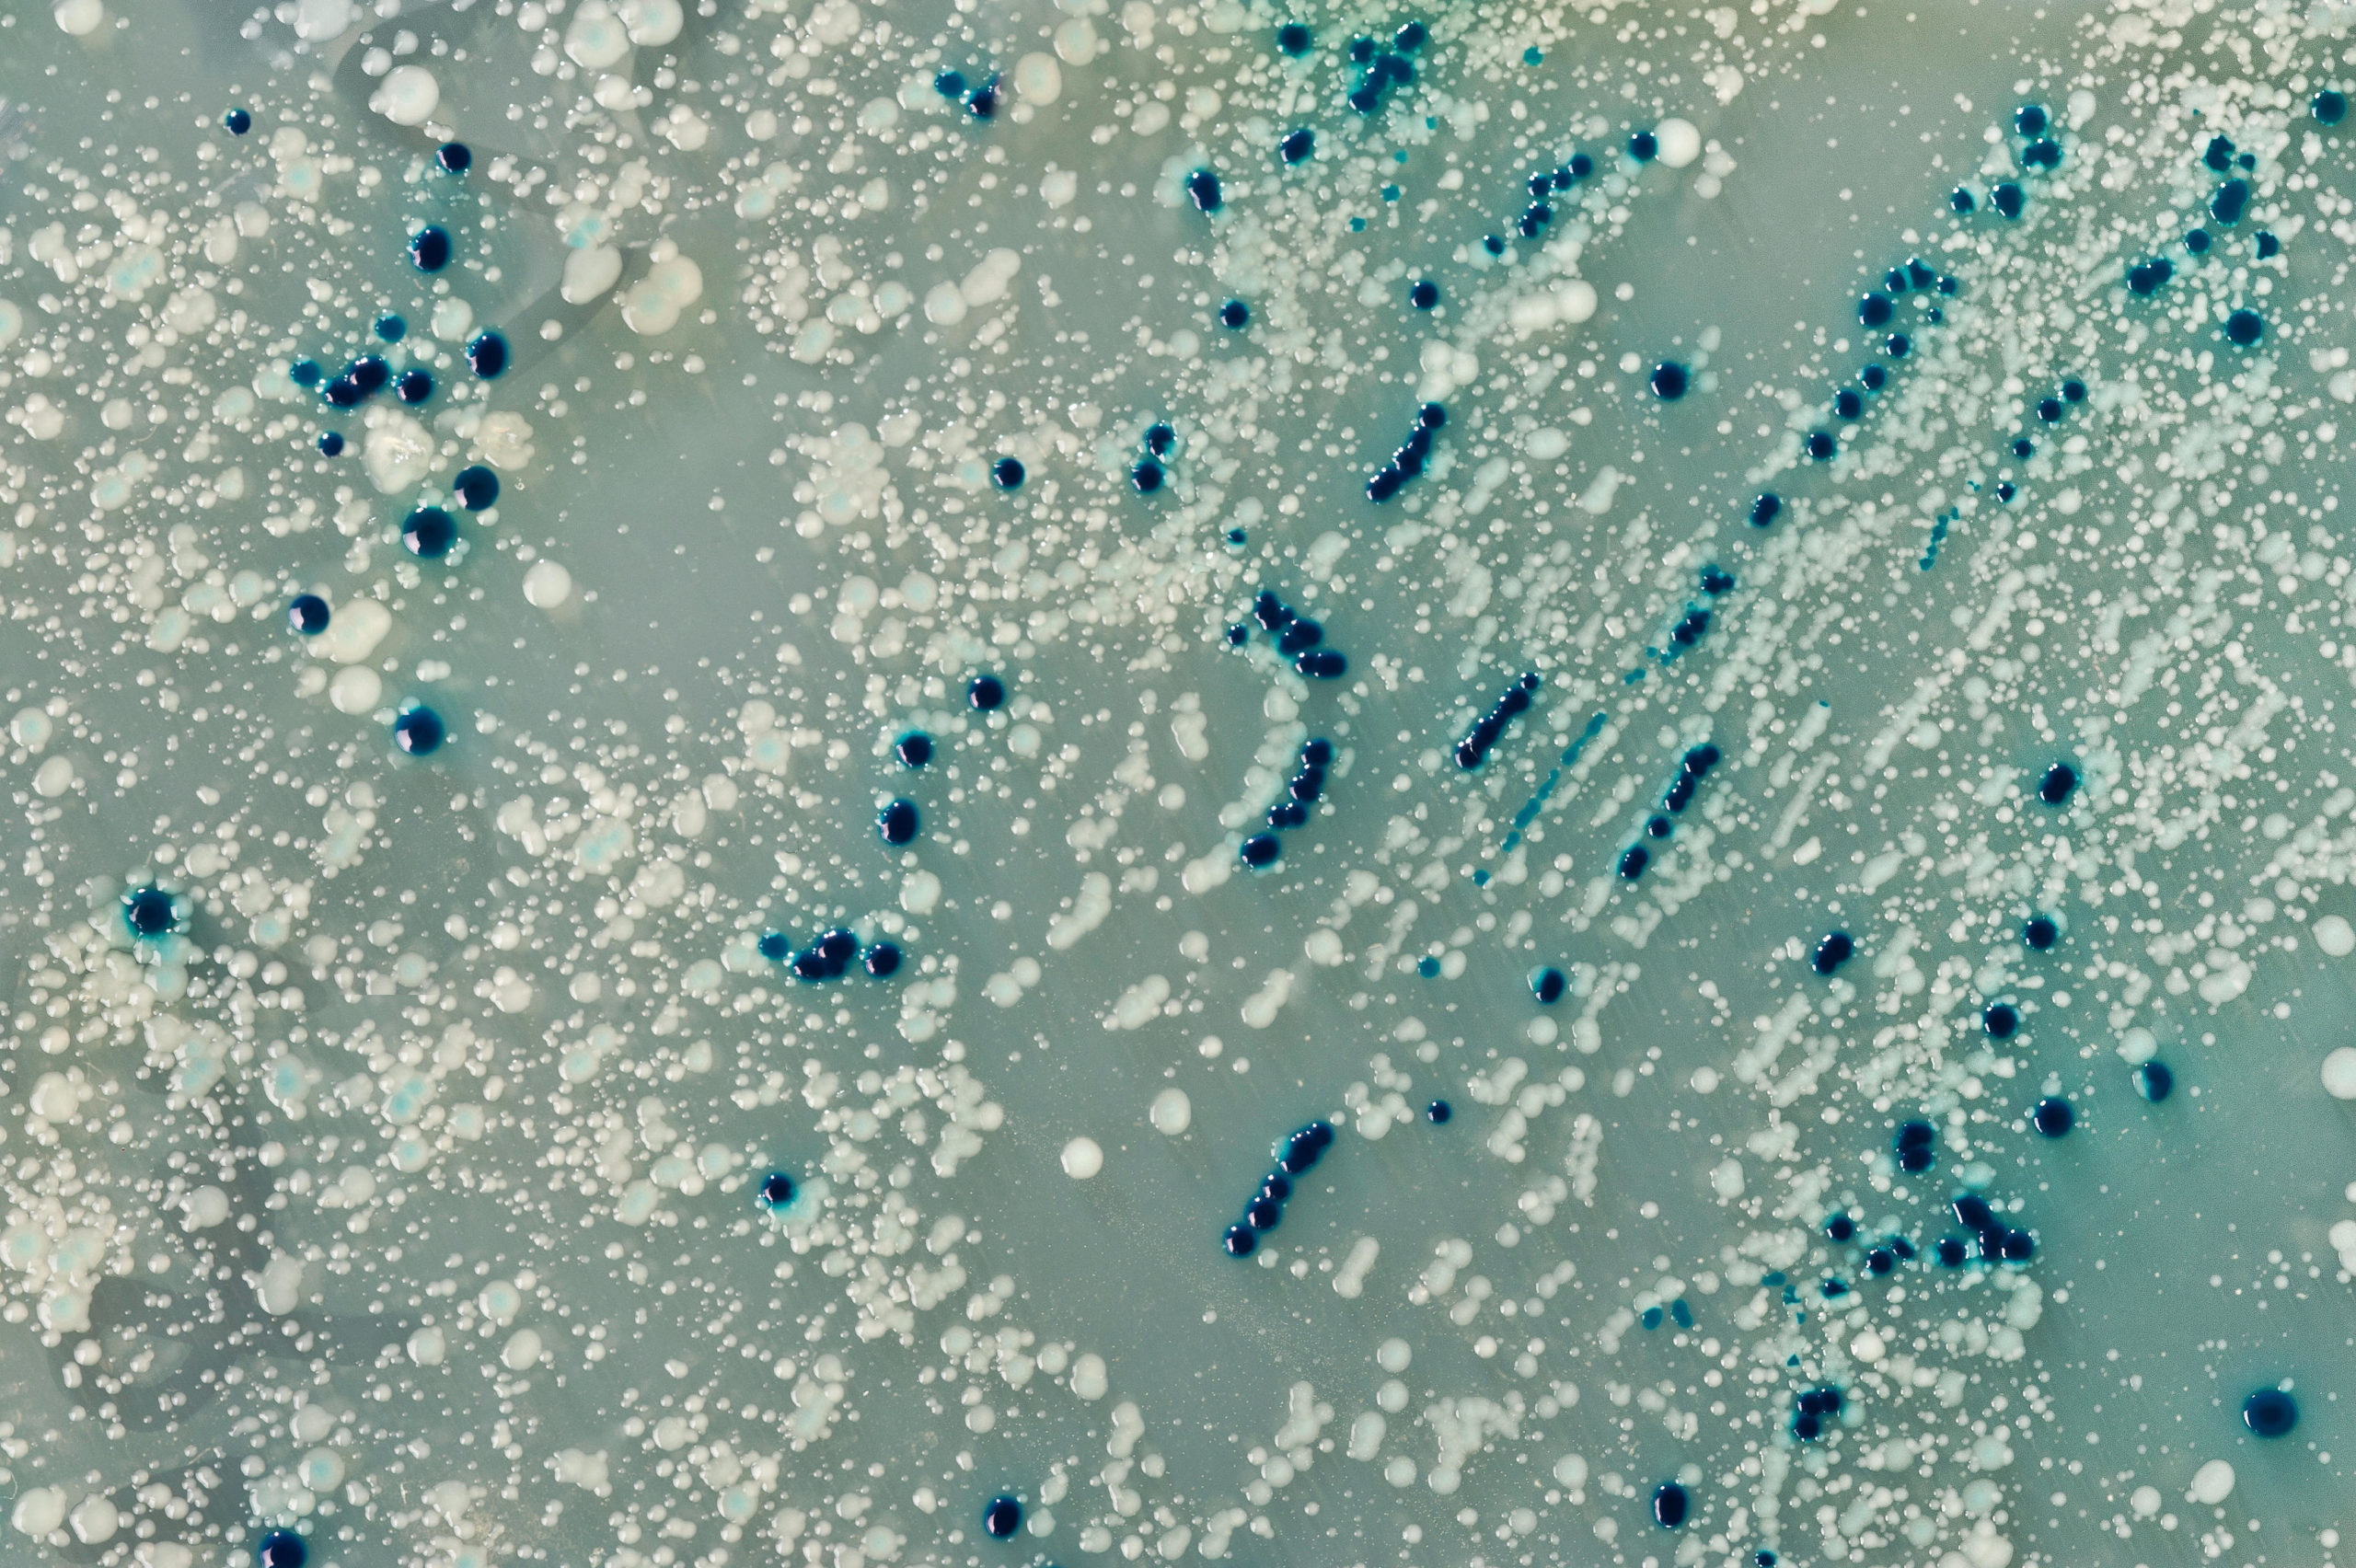 <p>Bacterial colonies growing on a petri dish (Image: Alamy)</p>